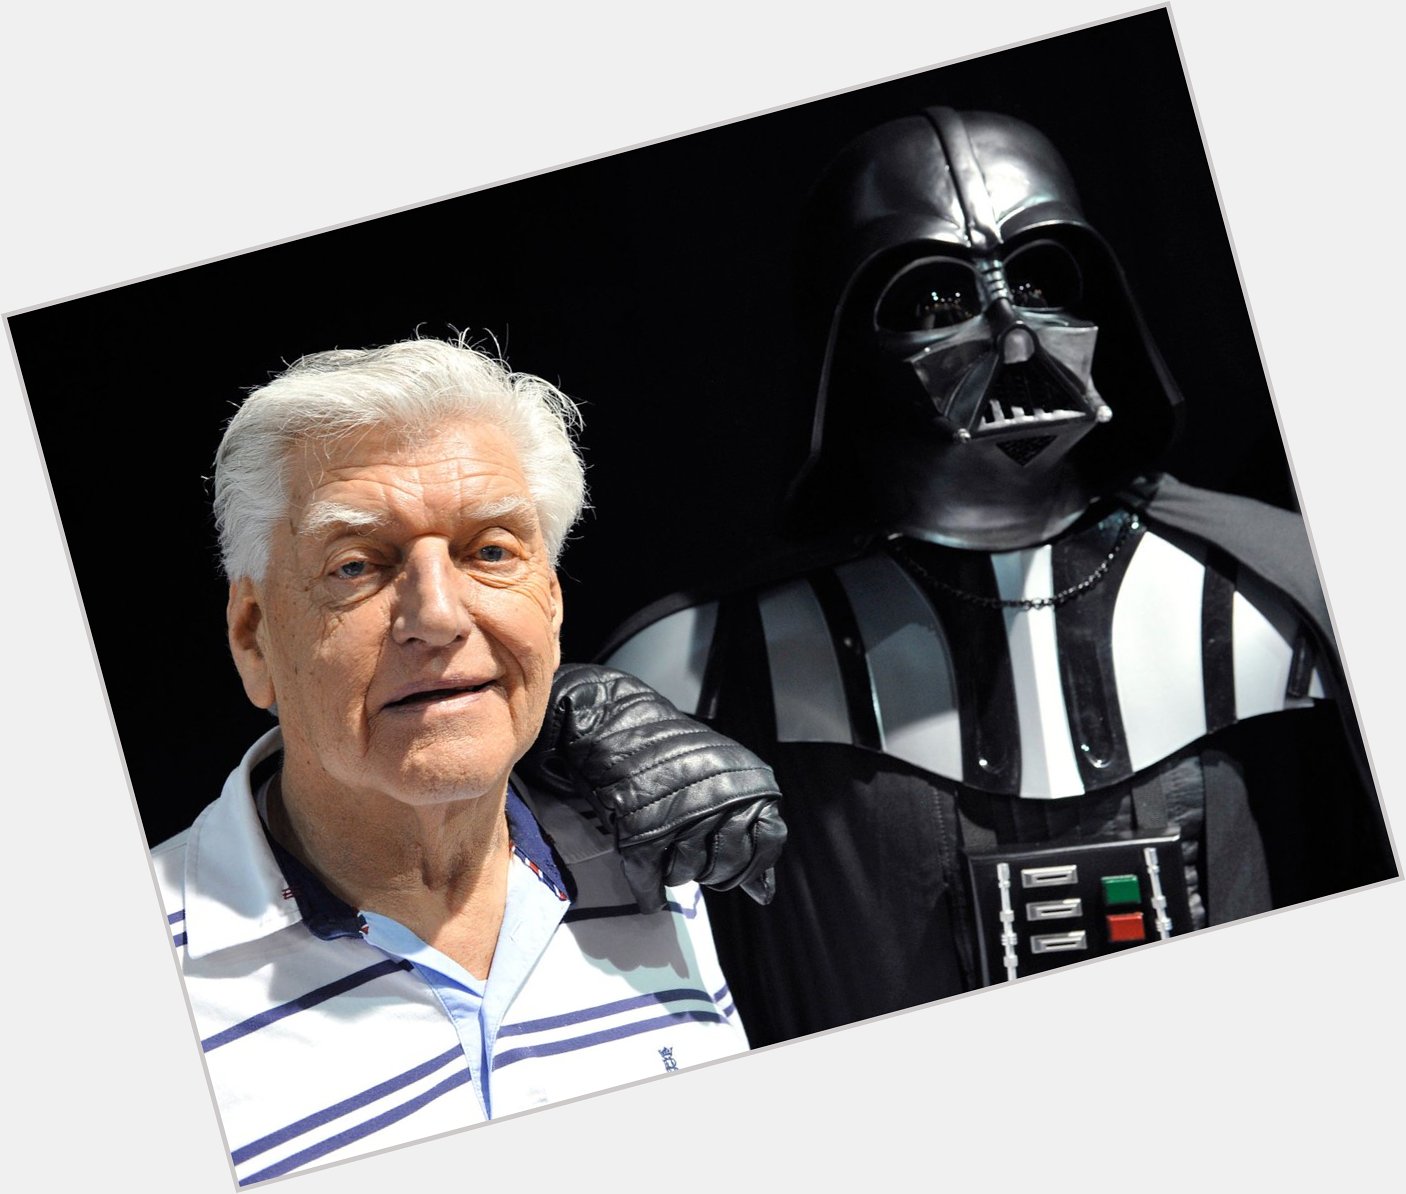 Happy Birthday to Mr. David Prowse (the body of Darth Vader)! May the force be with you 